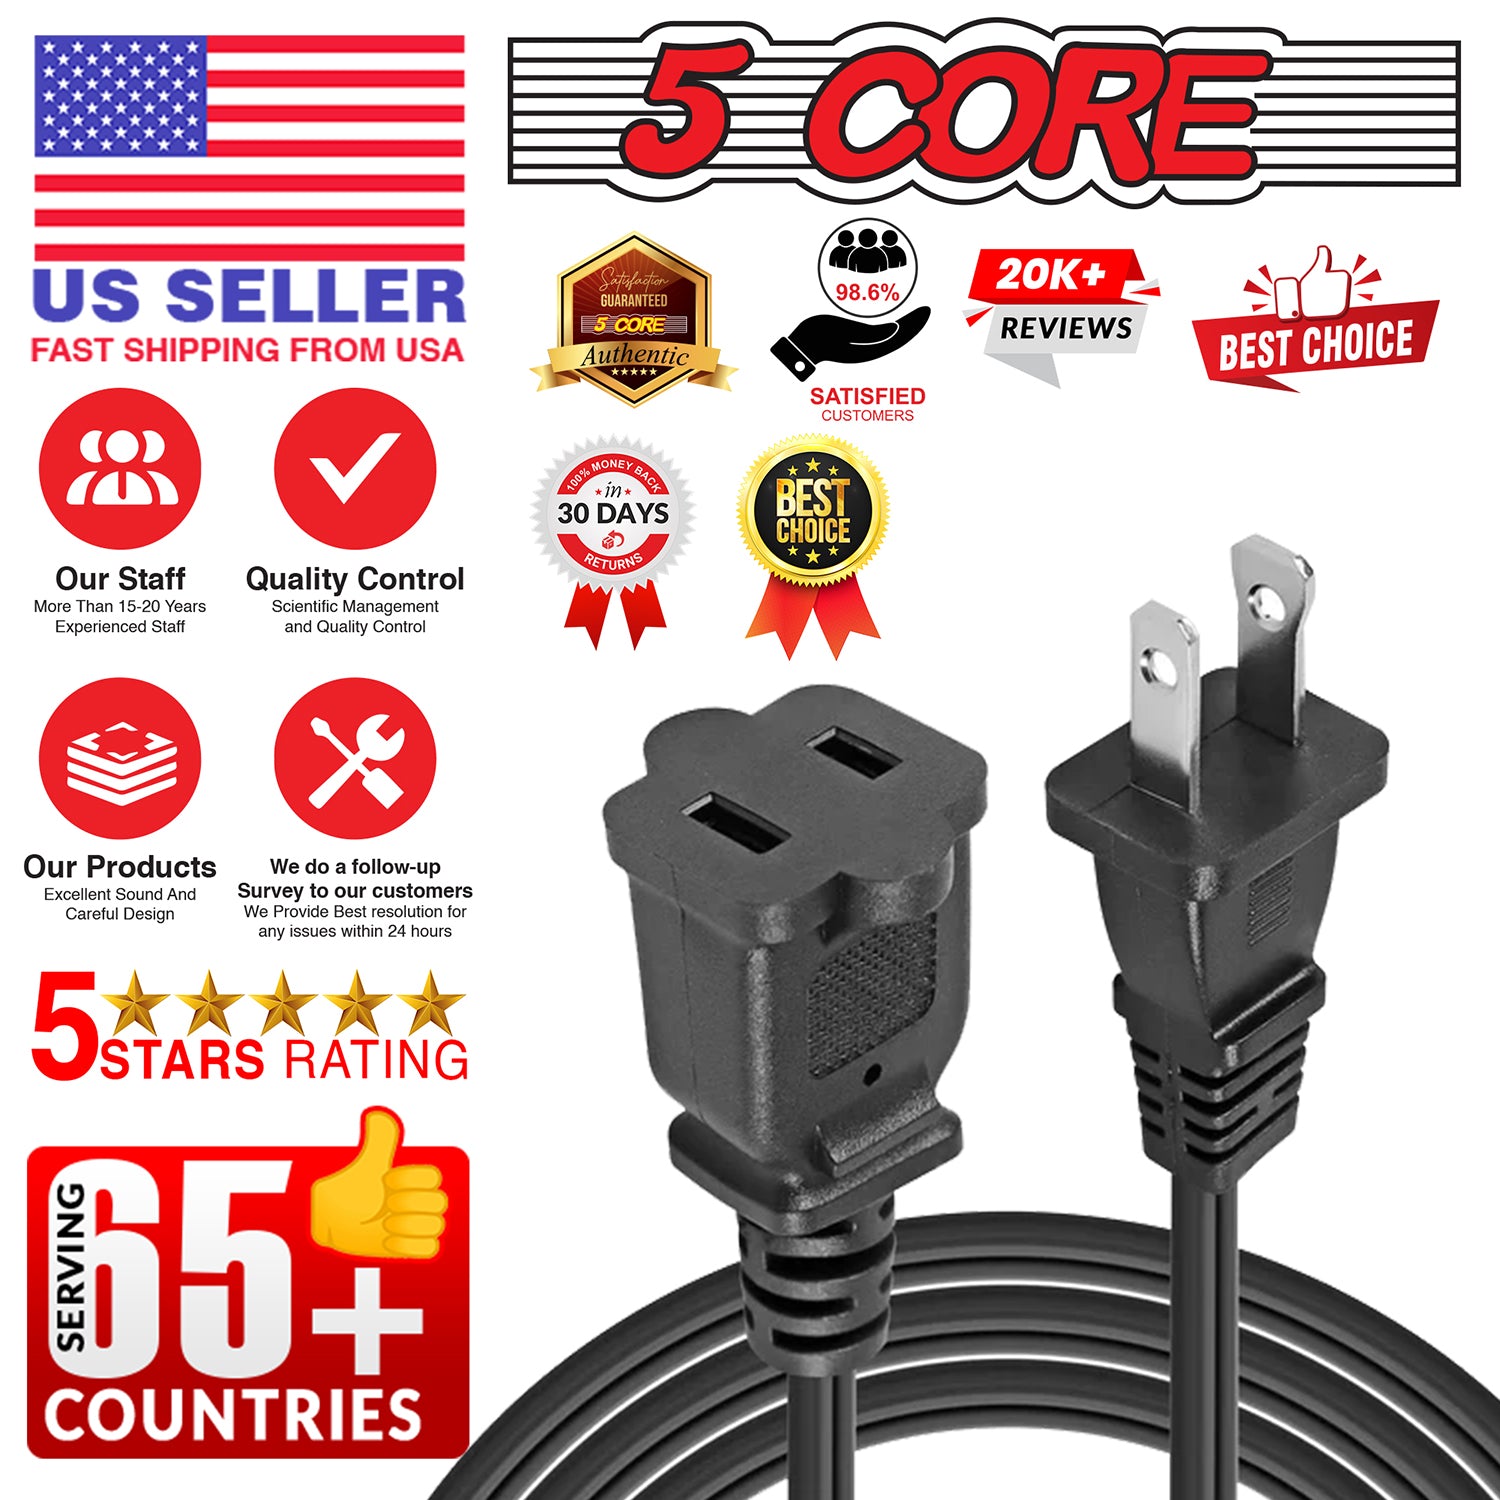 5 Core AC Power Cord 12 Ft S Polarized Male to Female 2 Prong Extension Cords Adapter 16AWG/2C 125V 13A